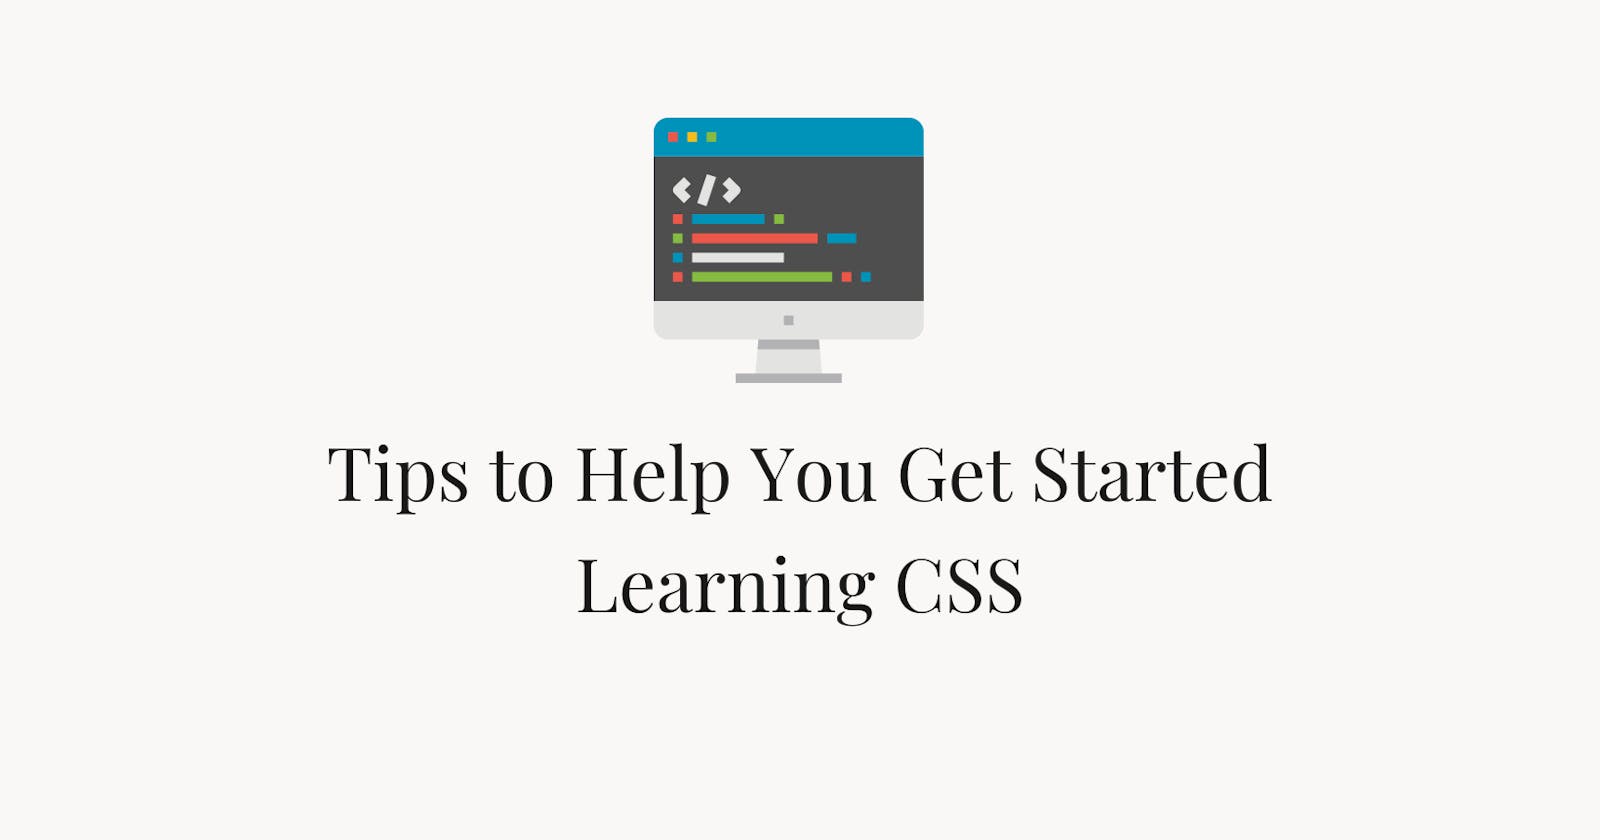 Tips to Help You Get Started Learning CSS